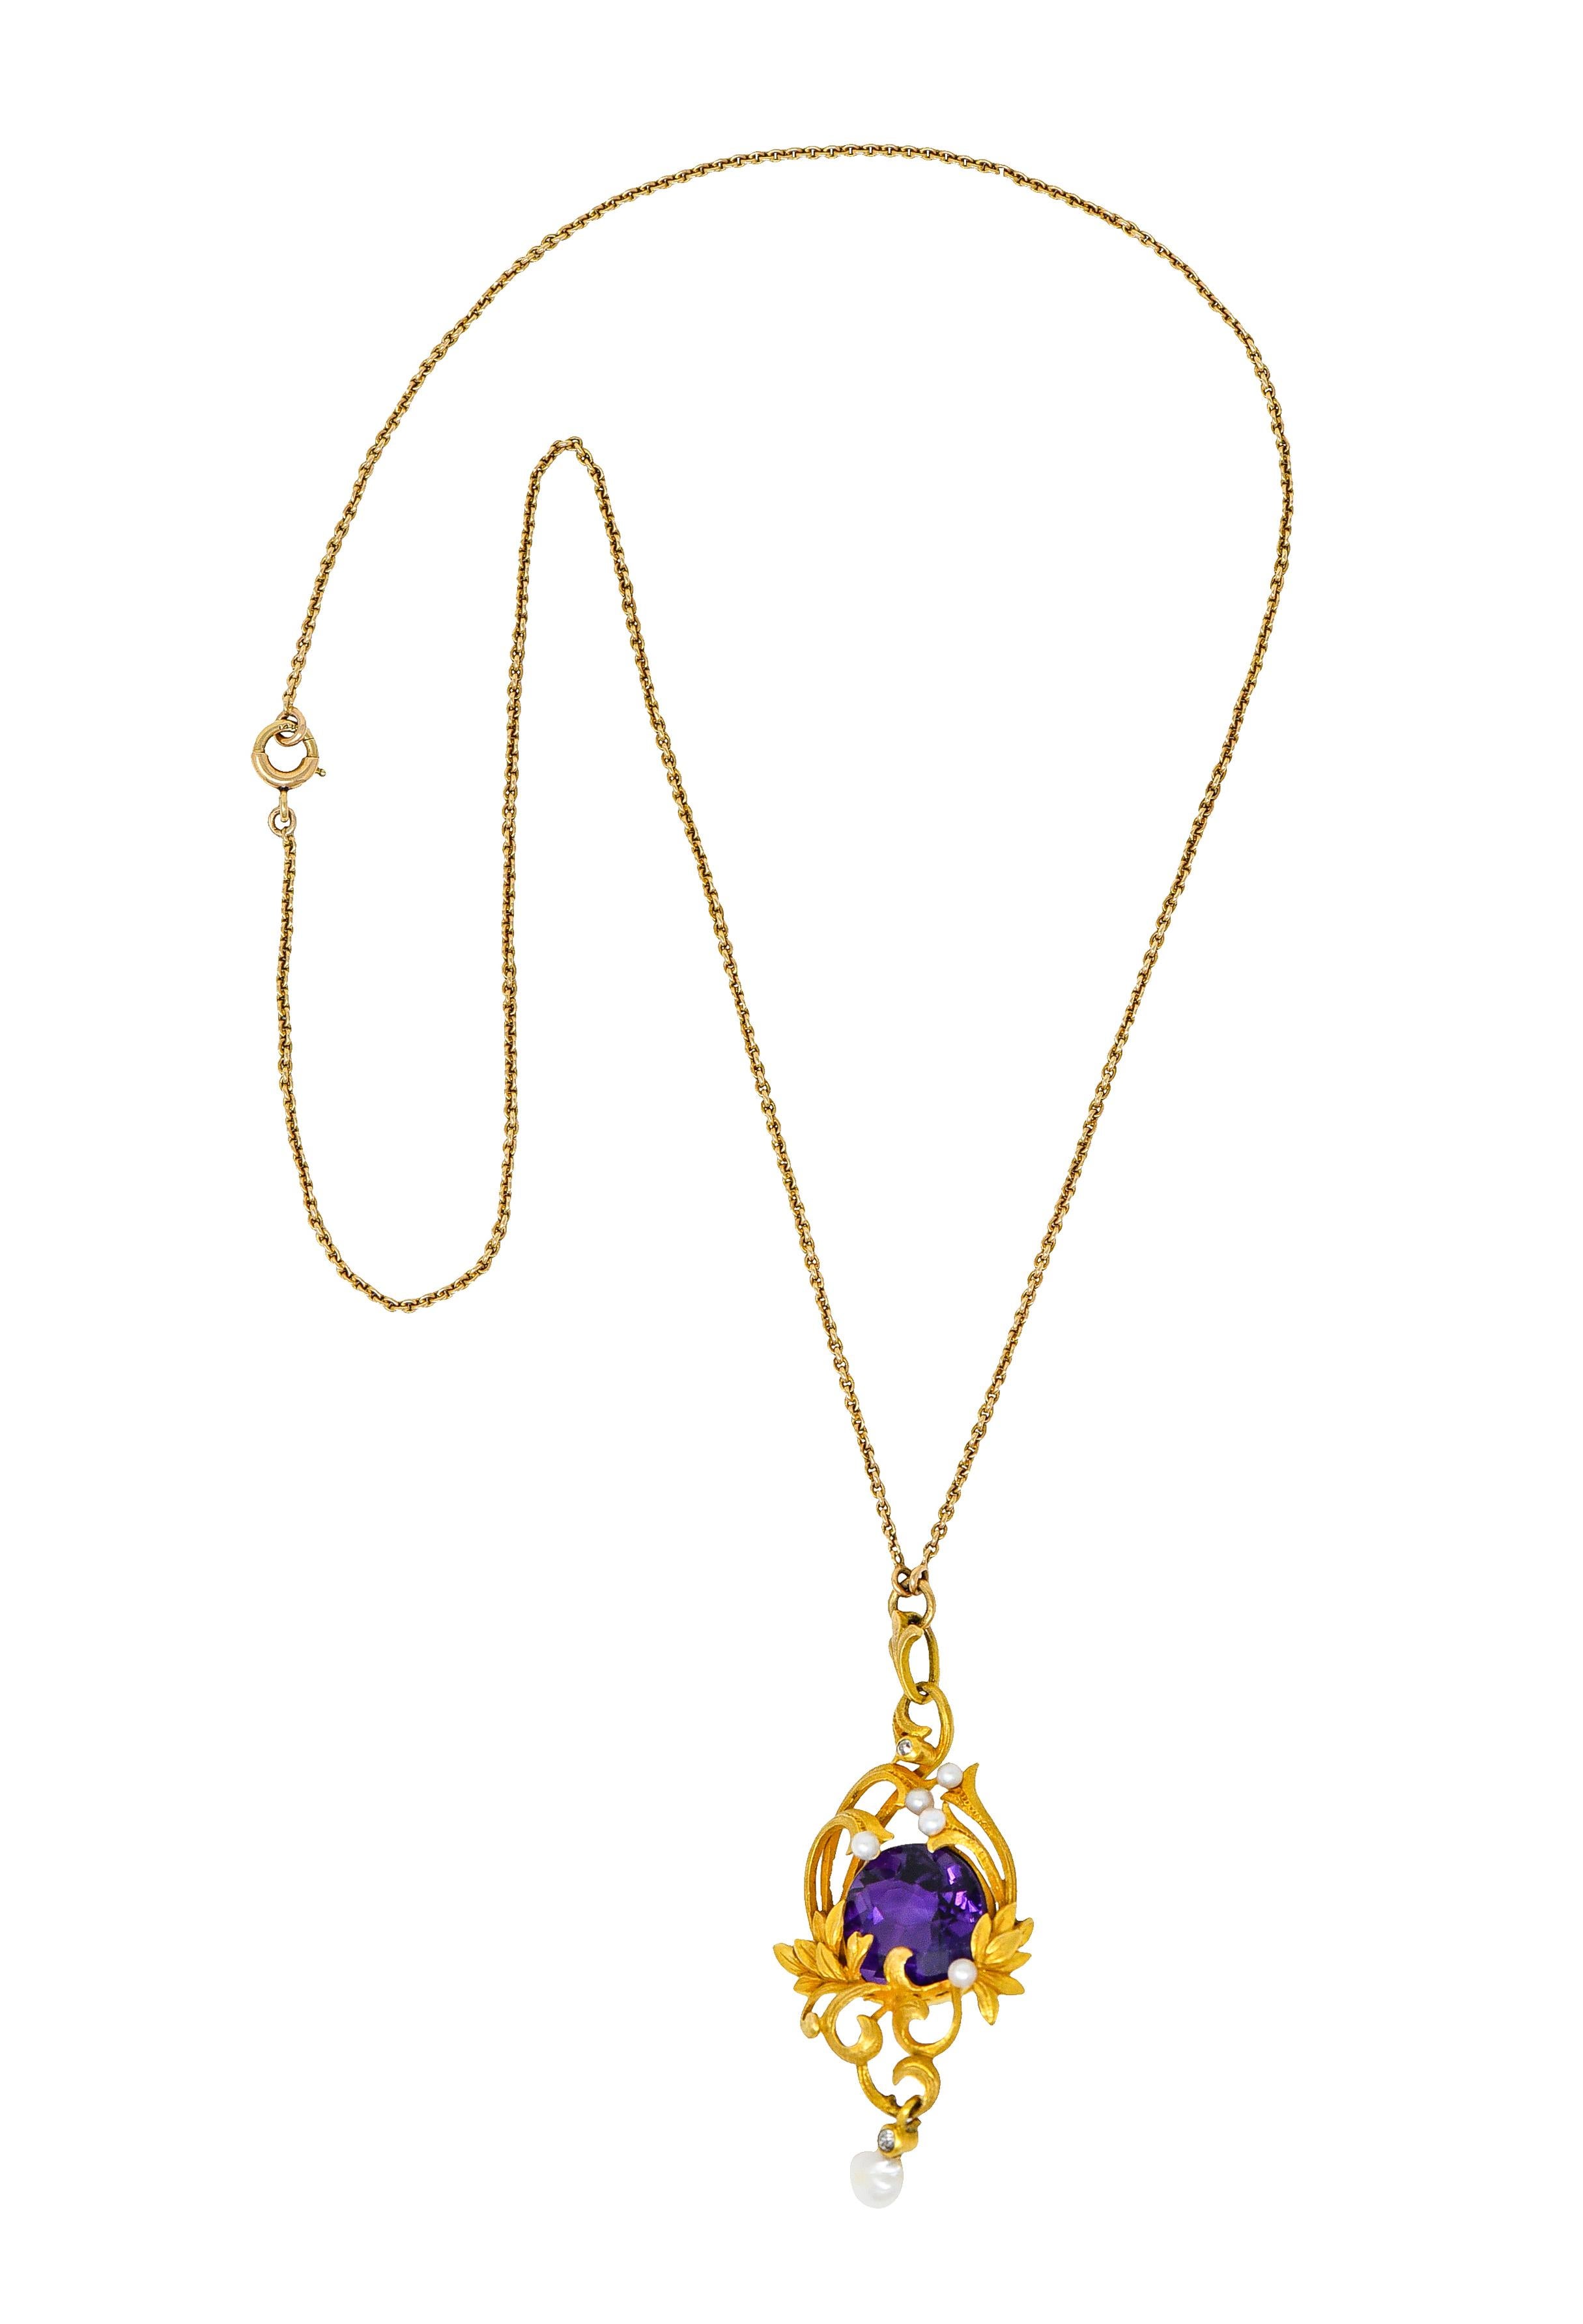 Cable chain necklace features a stylized foliate drop with amethyst, fresh water pearls and diamond

Foliate and whiplash drop contains freshwater pearl accents, a diamond and suspended baroque pearl

Round cut amethyst is a rich saturated purple